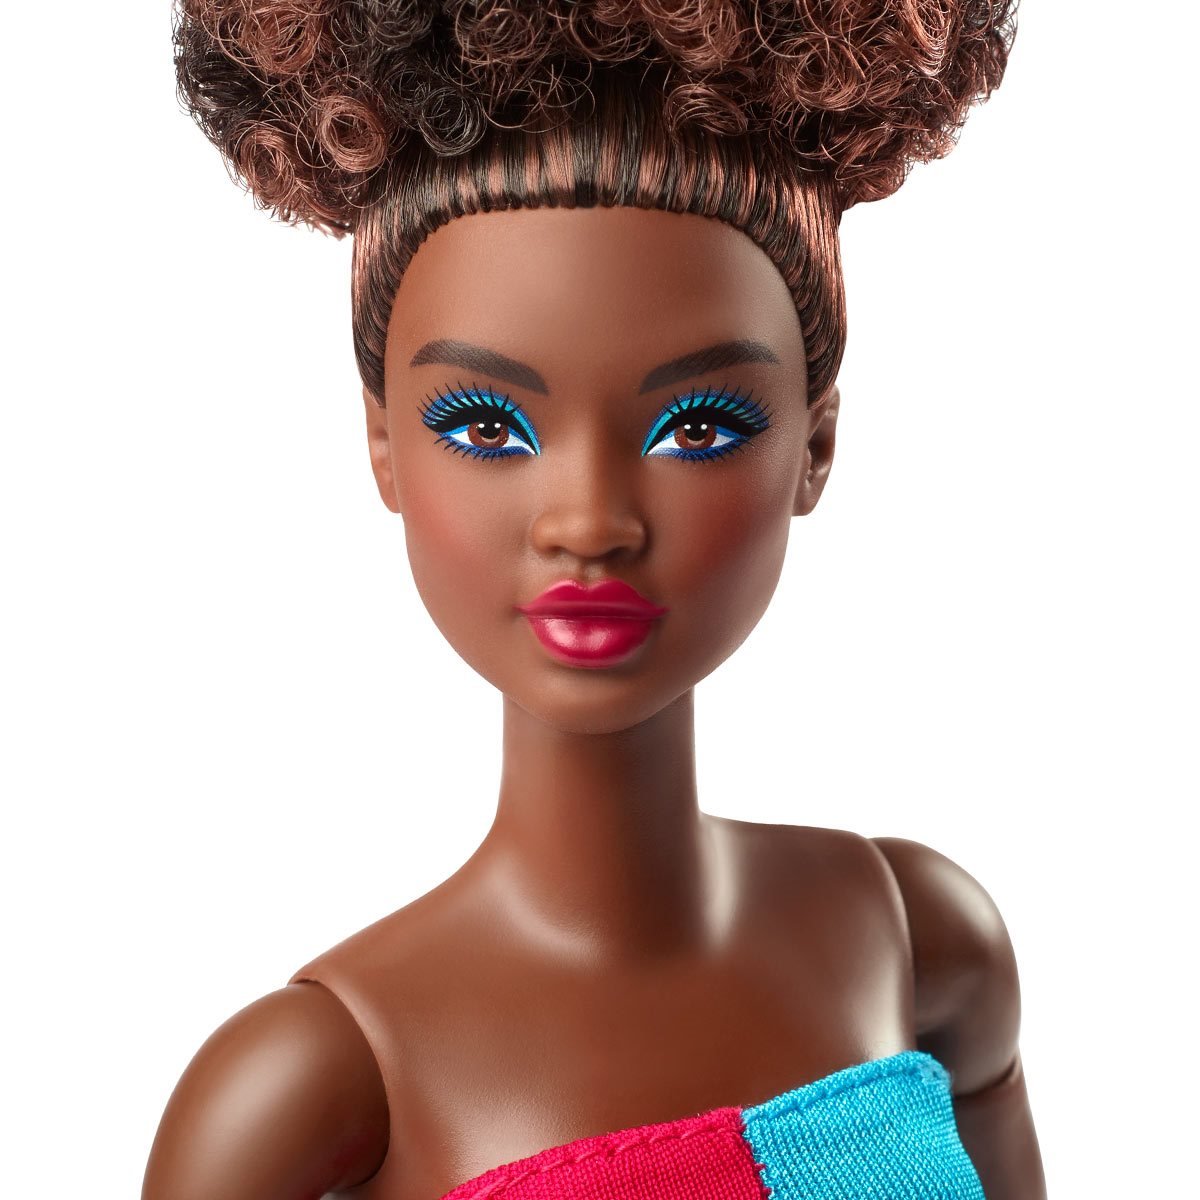 Mattel selling a Weird Barbie doll is antithetical to the whole